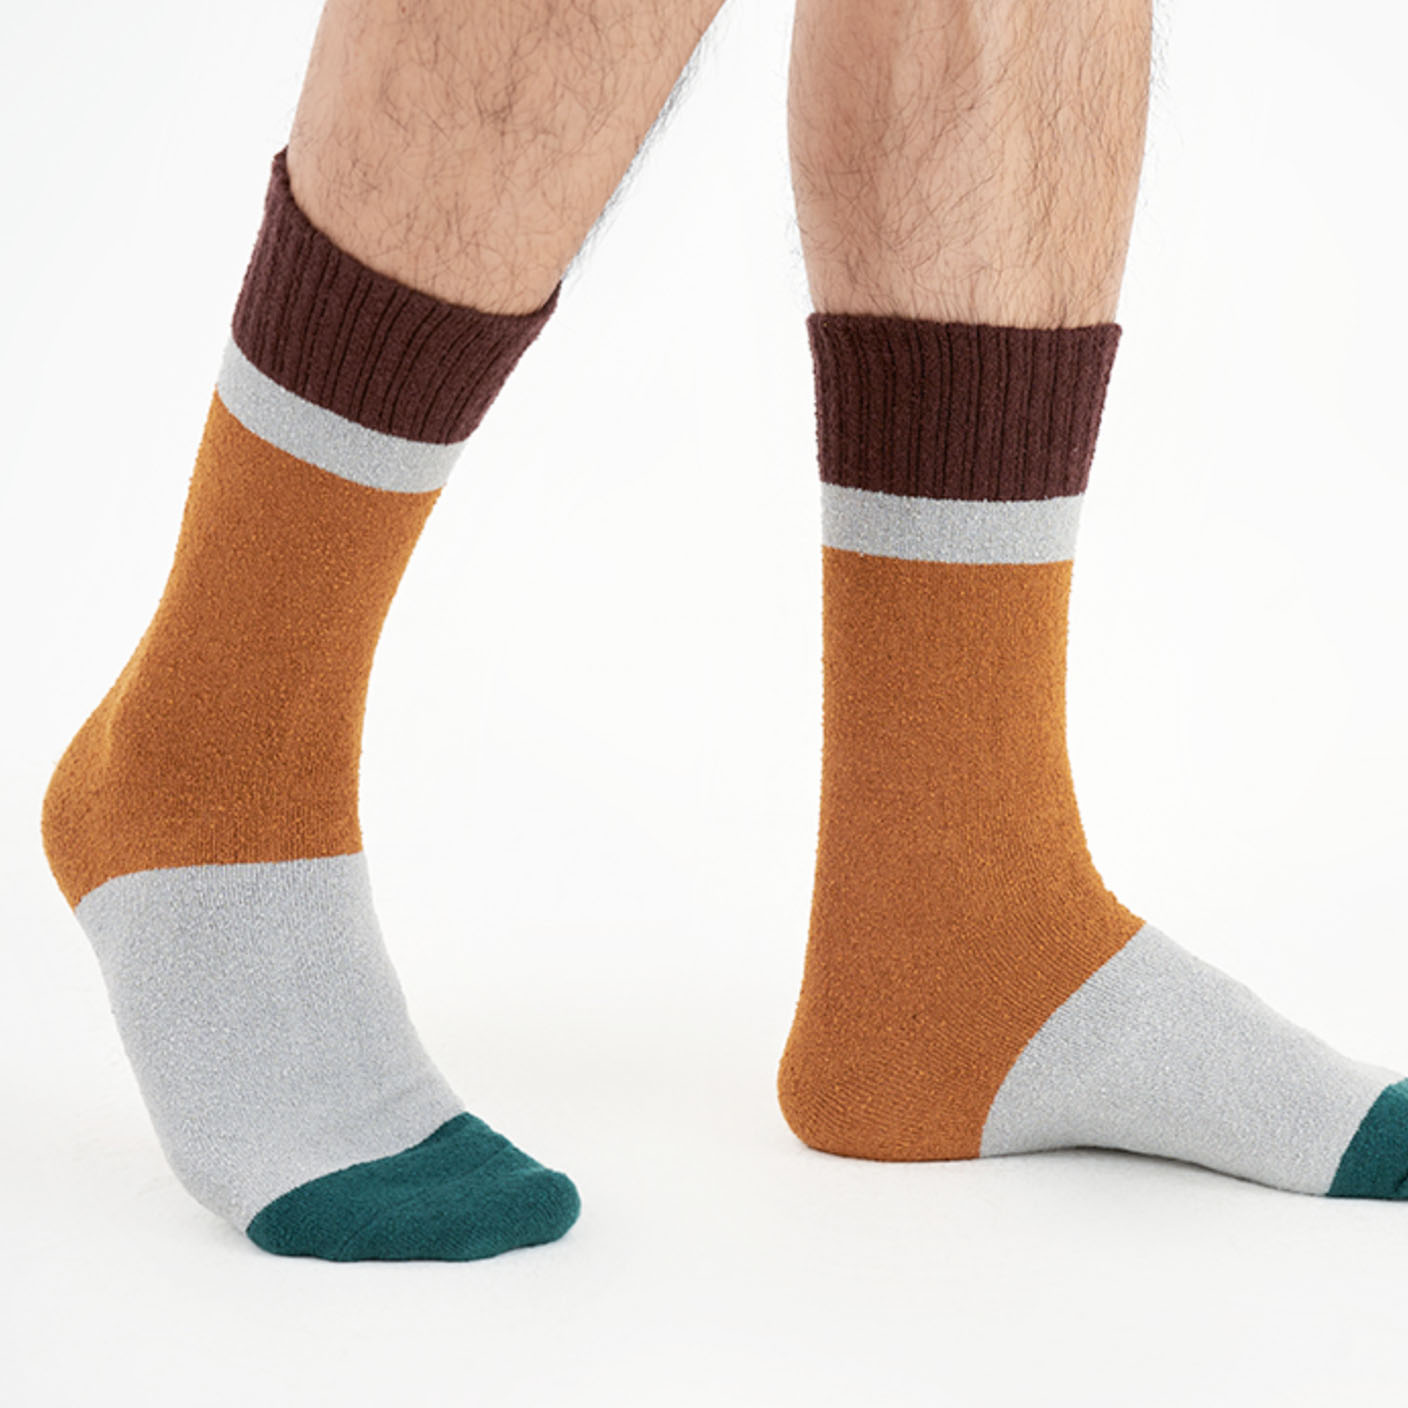 Fluffy Socks for Everyday Wear, Hiking, and Running